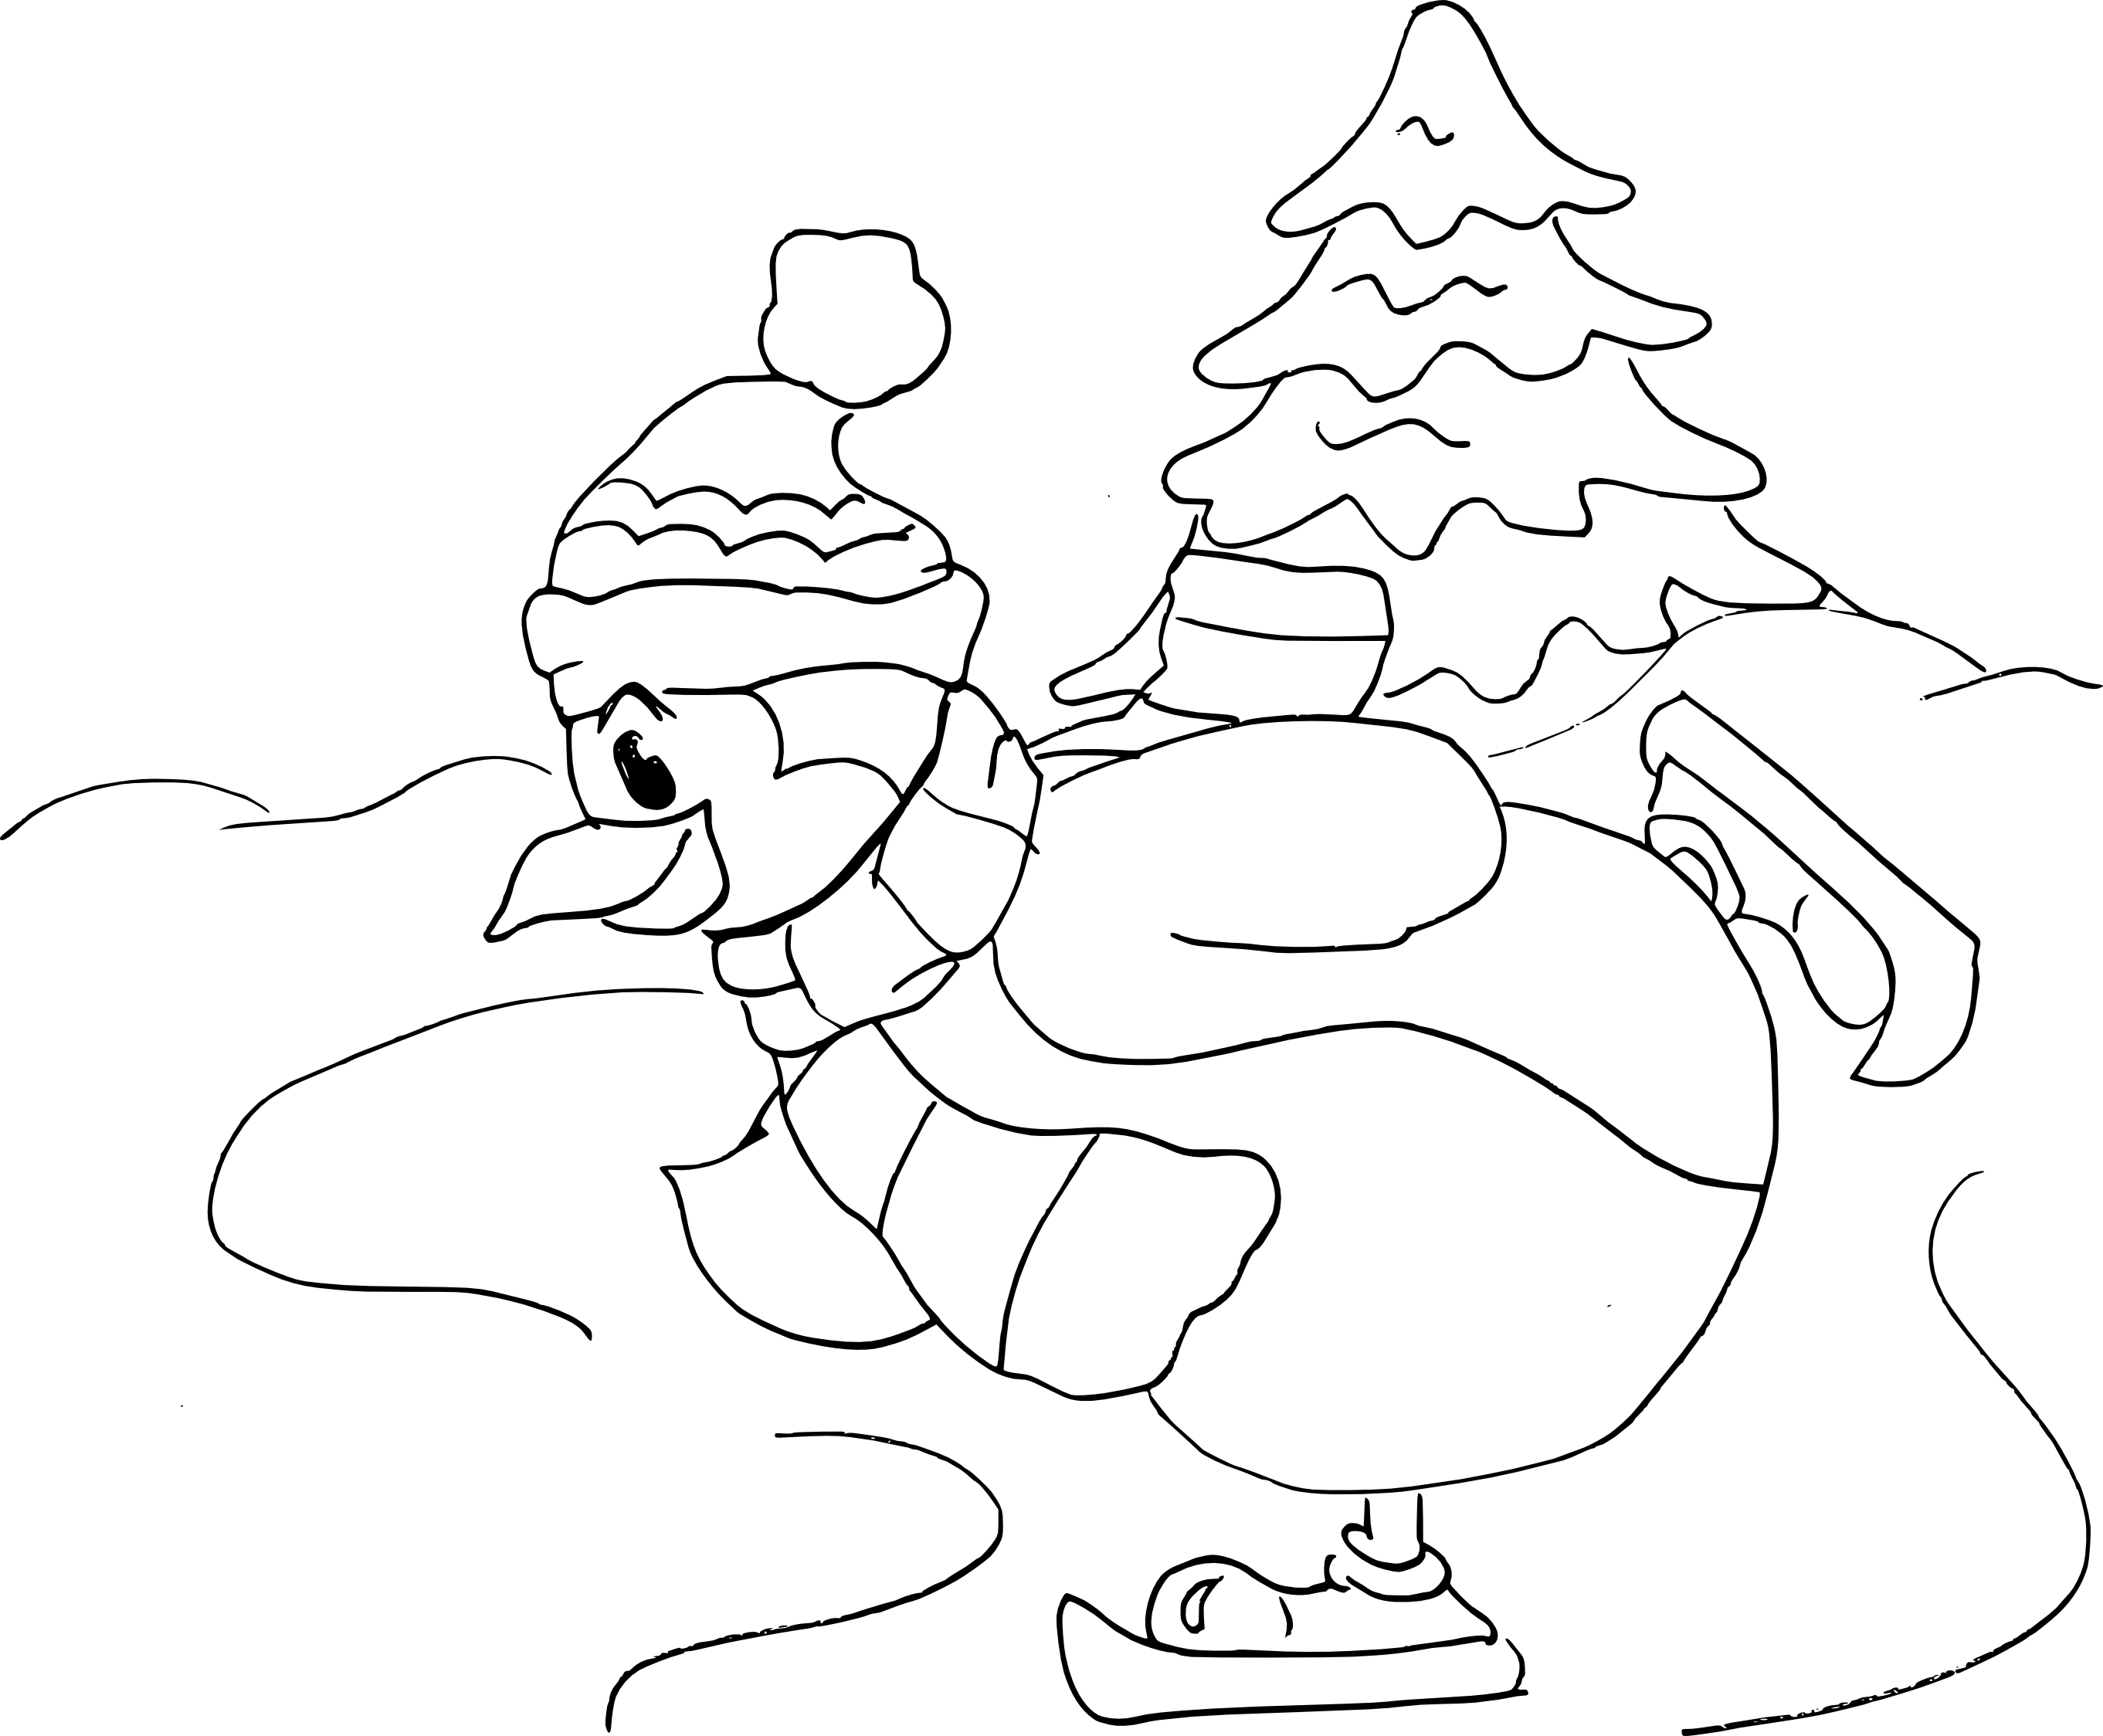 Penguin At Christmas coloring page